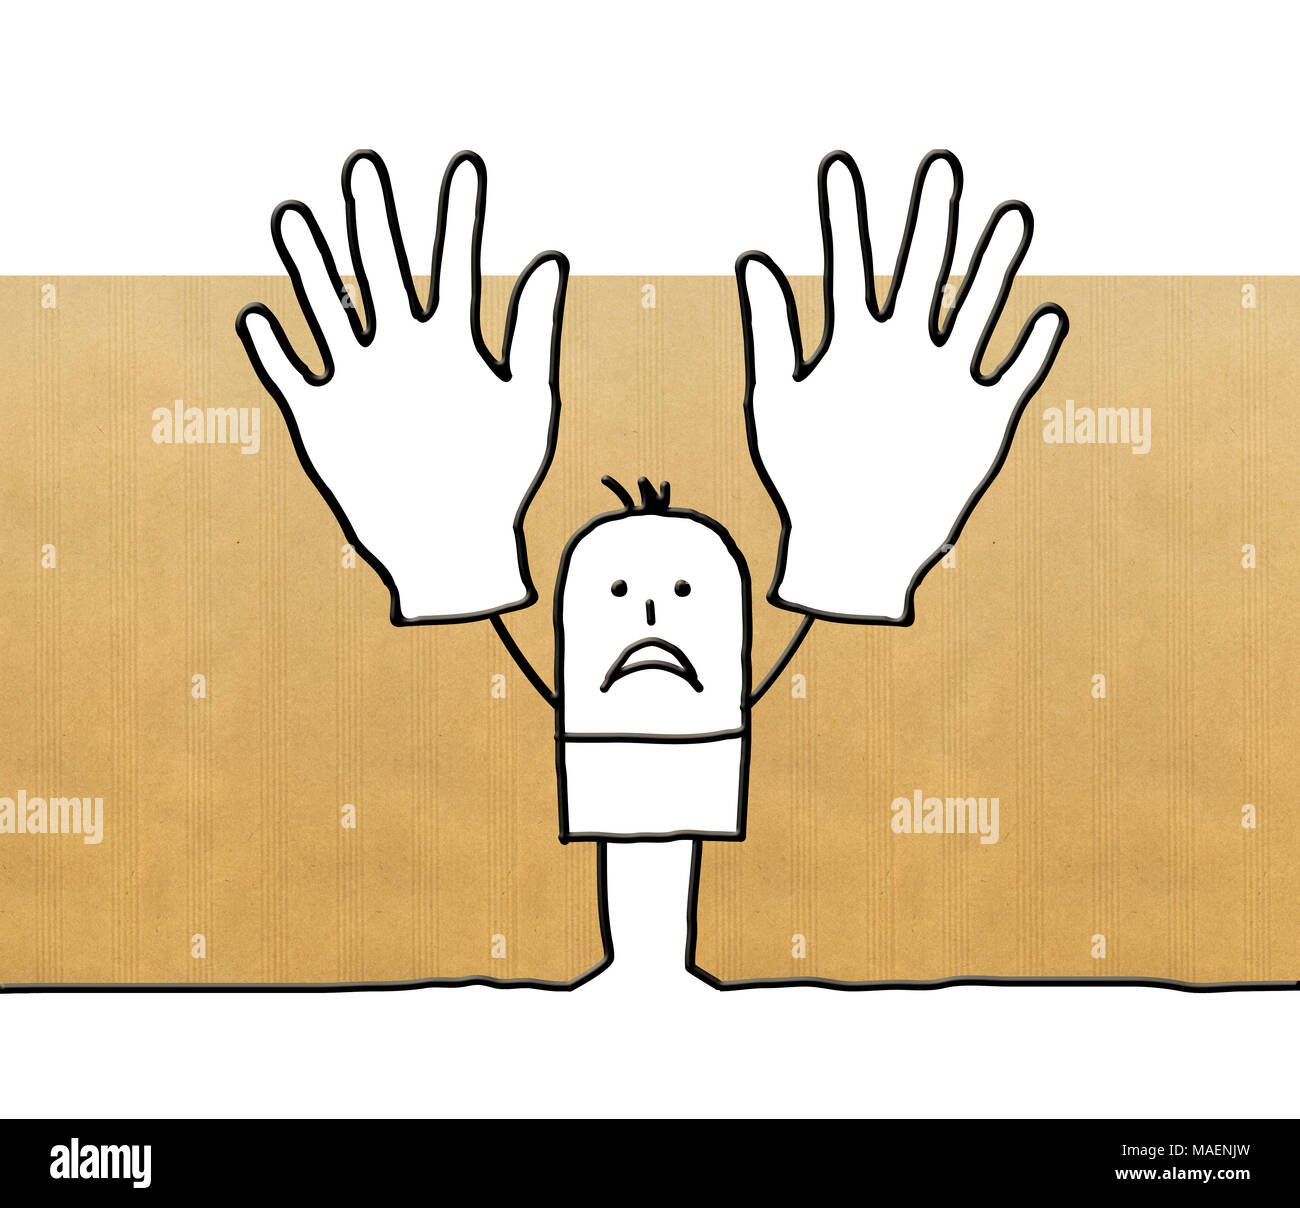 Cartoon man with two hands up Stock Photo